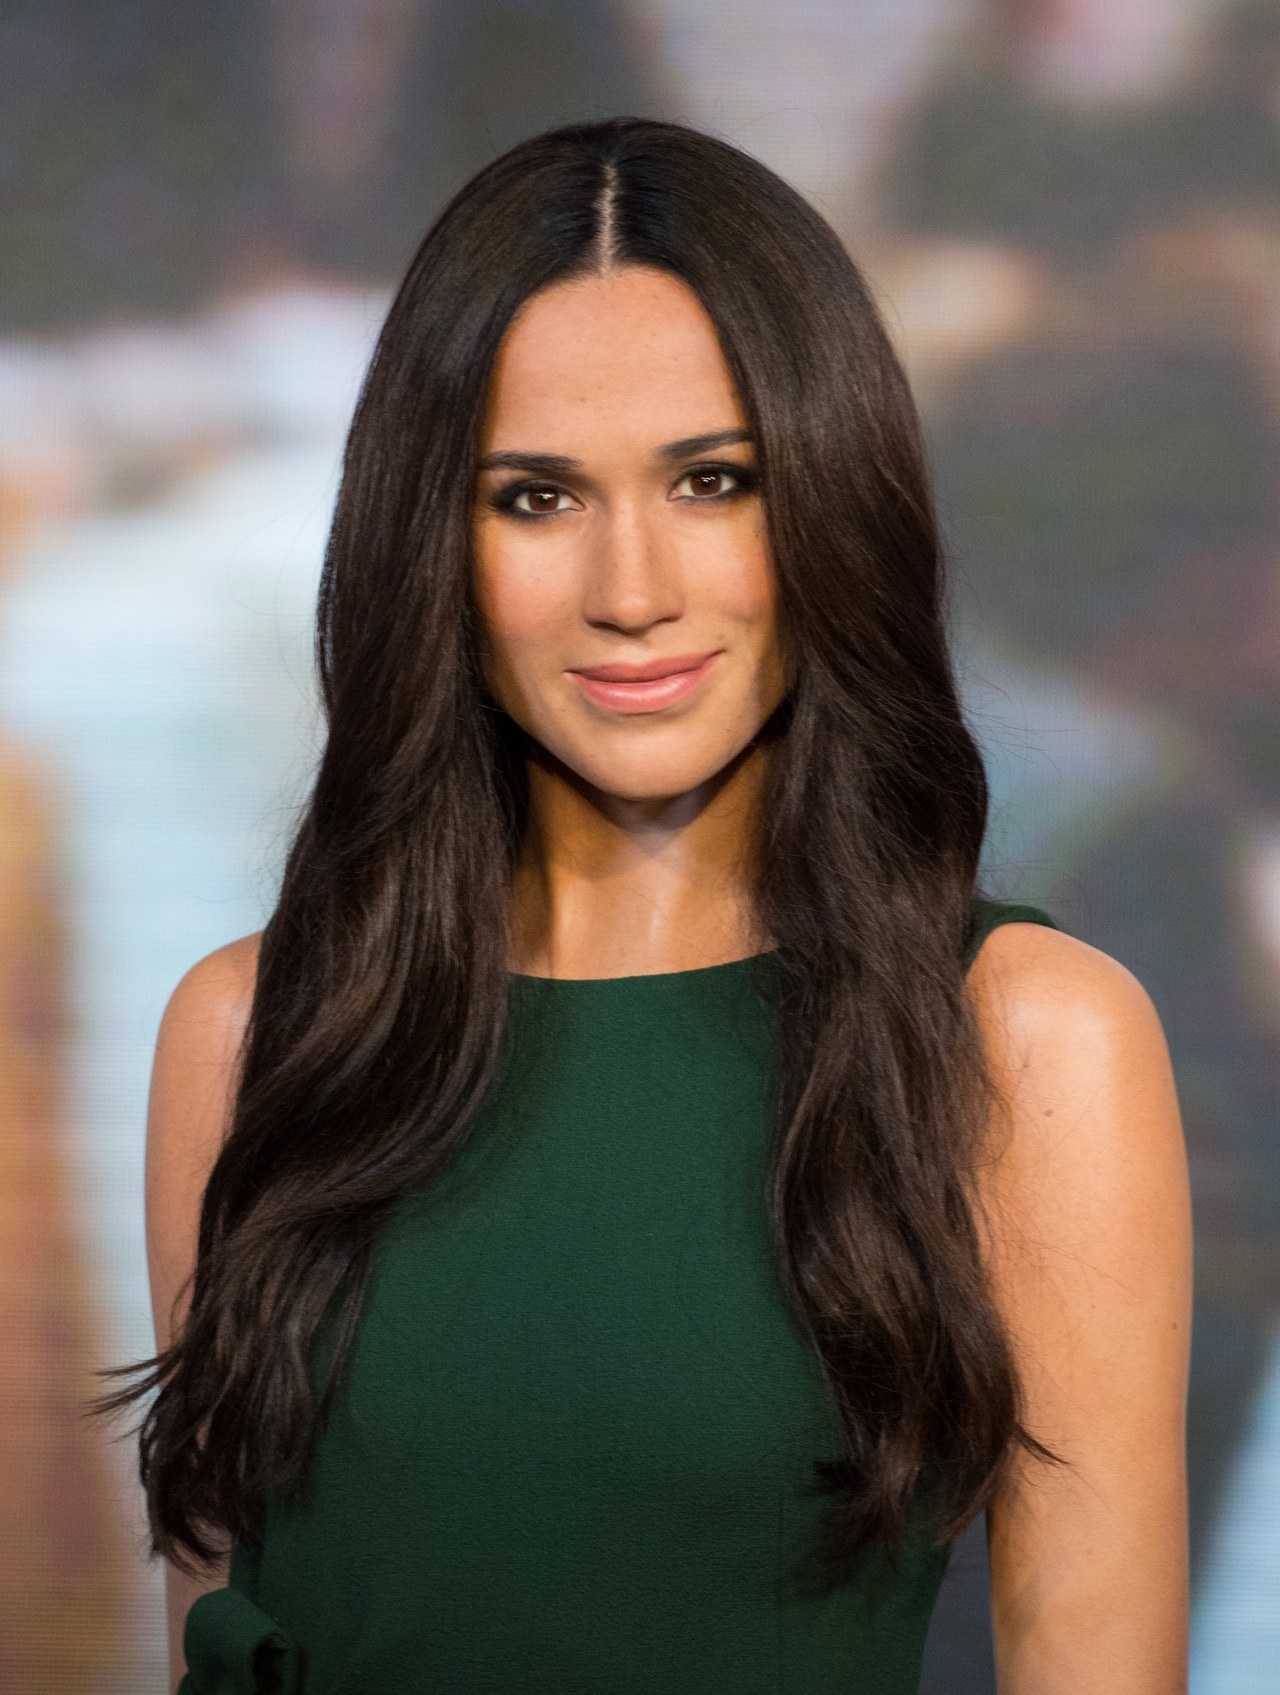 70+ Hot Pictures Of Meghan Markle Which Are Just Too Hot To Handle 656